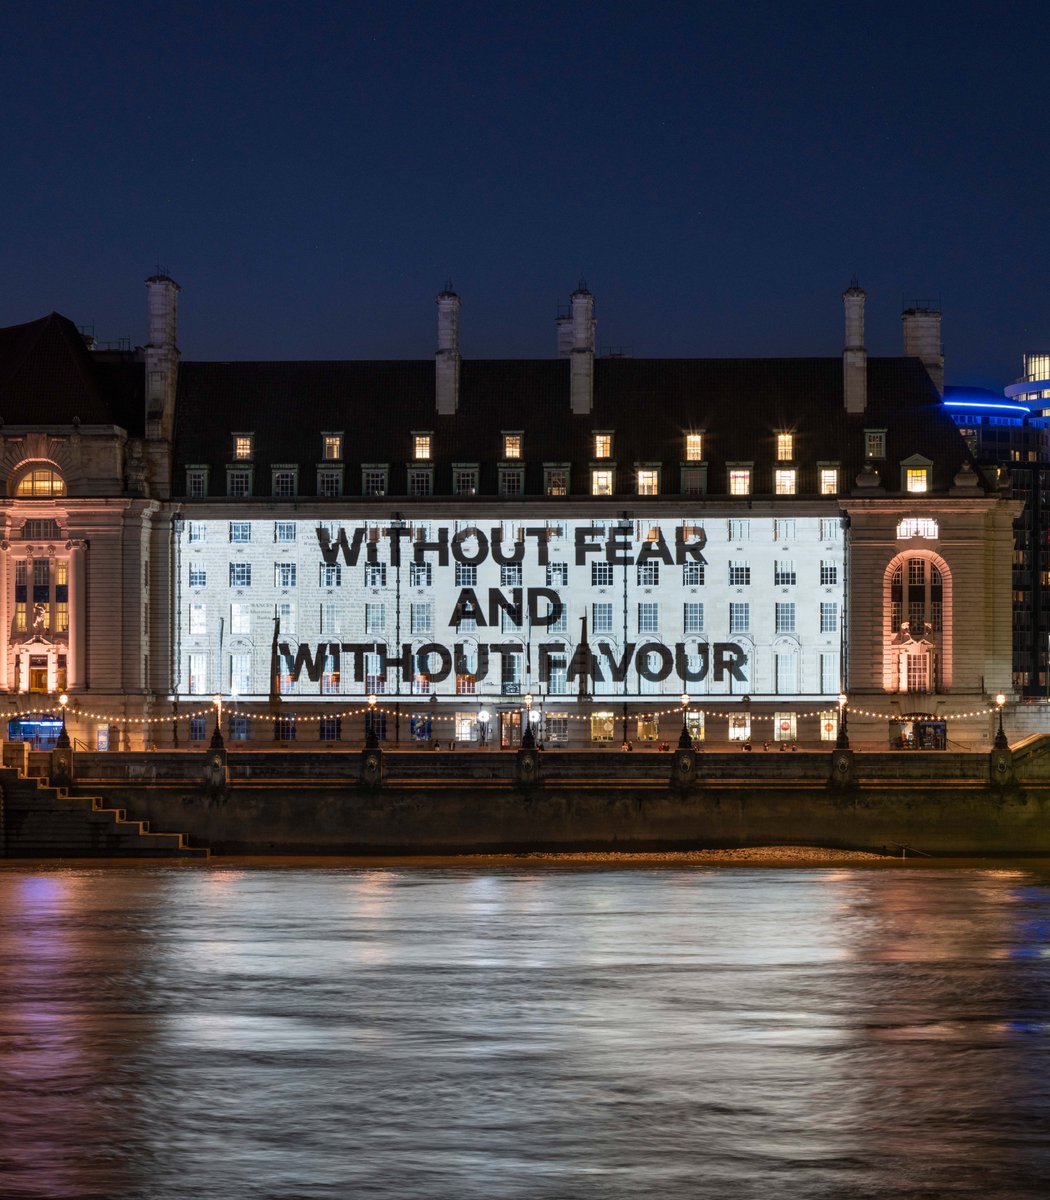 On the eve of #DemocracyDay, the @FT launched its new brand film by projecting it onto County Hall. 'Without fear and without favour' shows how the words on the original FT masthead have inspired its journalism - and underlines the role of the press in a functioning democracy.